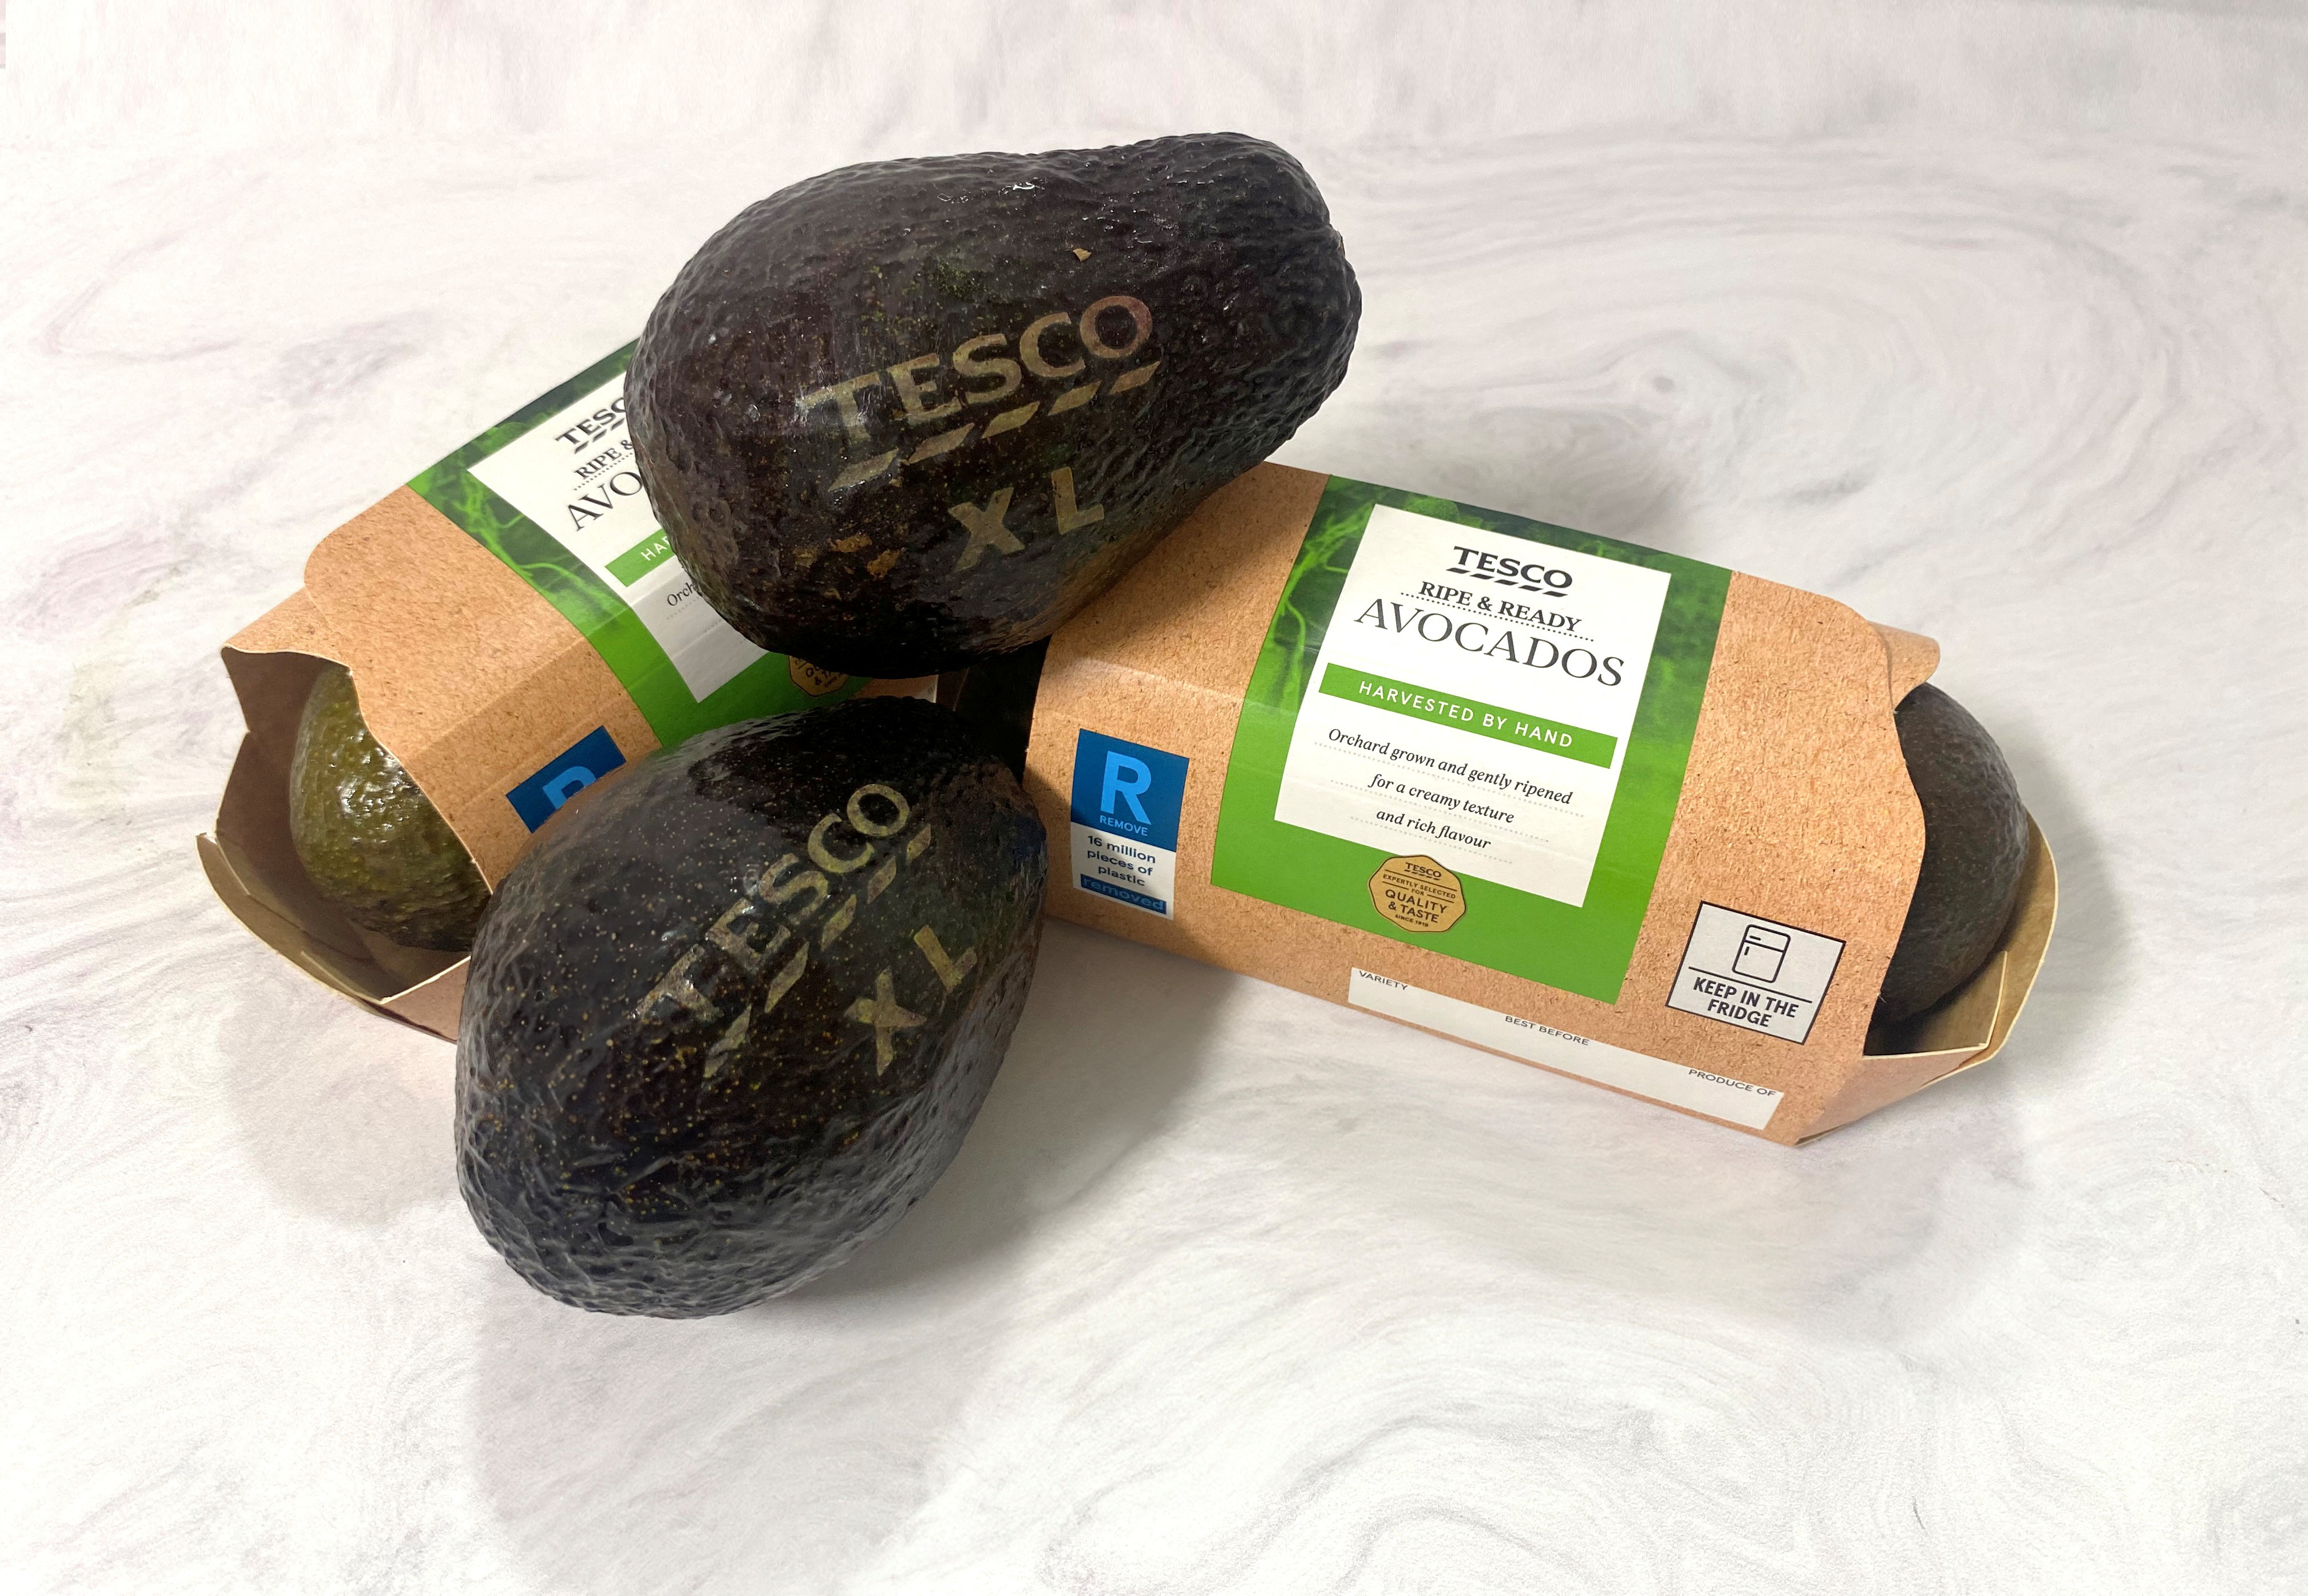 Lasered avocados are displayed by Tesco